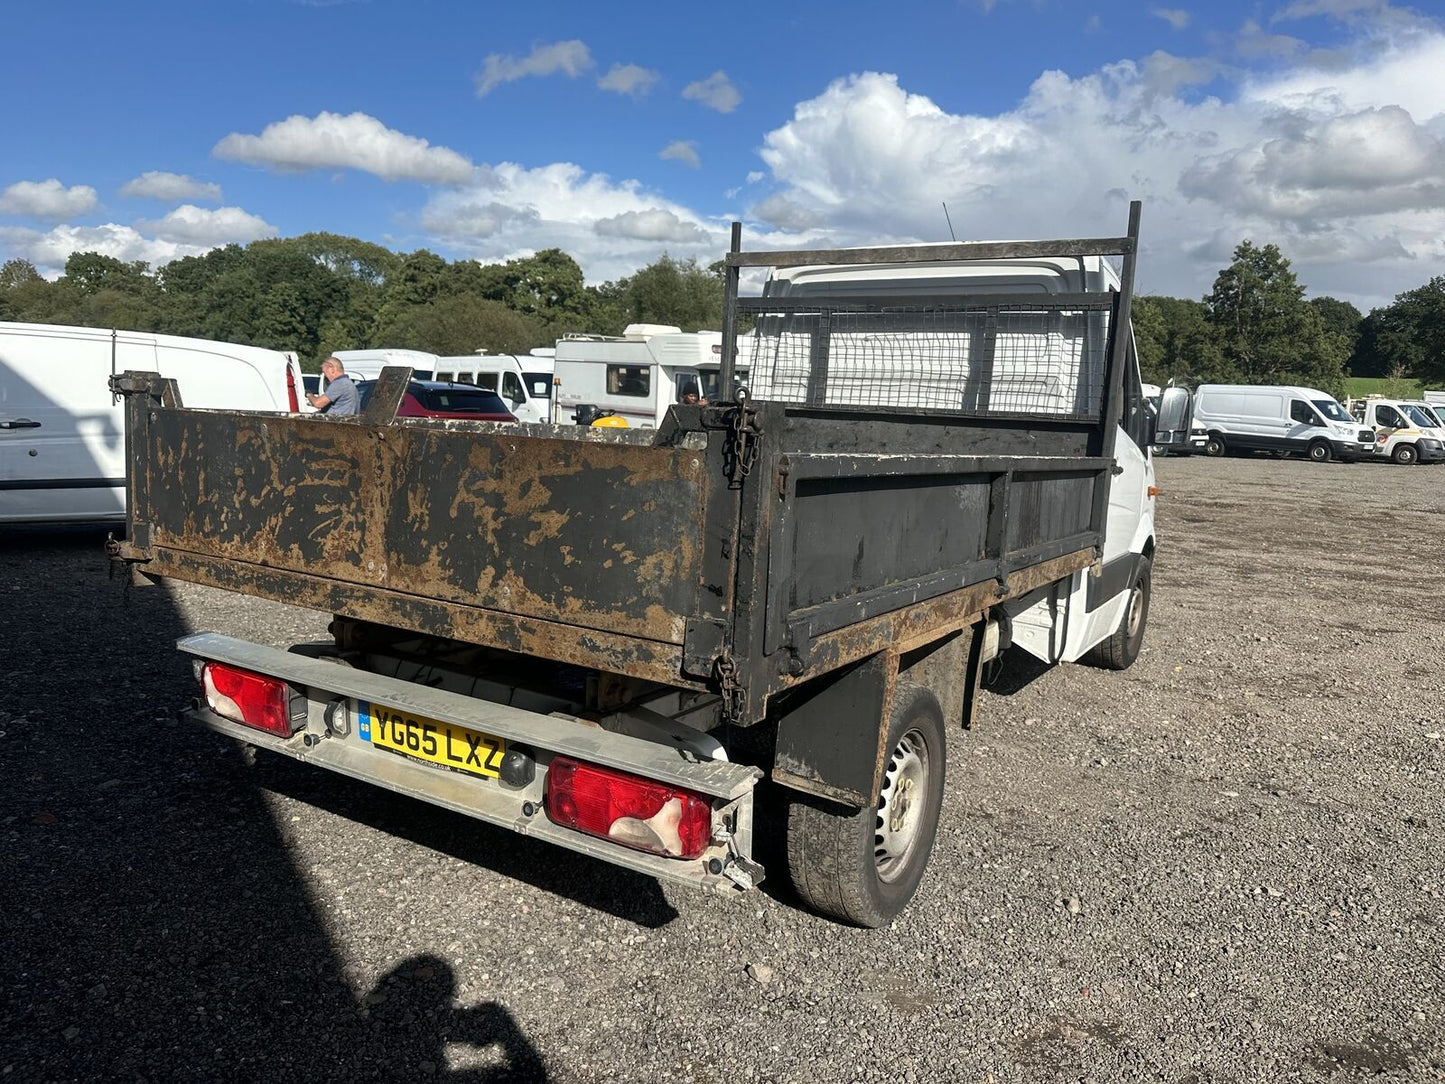 Bid on ONE OWNER, FULL SERVICE HISTORY: MERCEDES SPRINTER TIPPER - NO VAT ON HAMMER- Buy &amp; Sell on Auction with EAMA Group